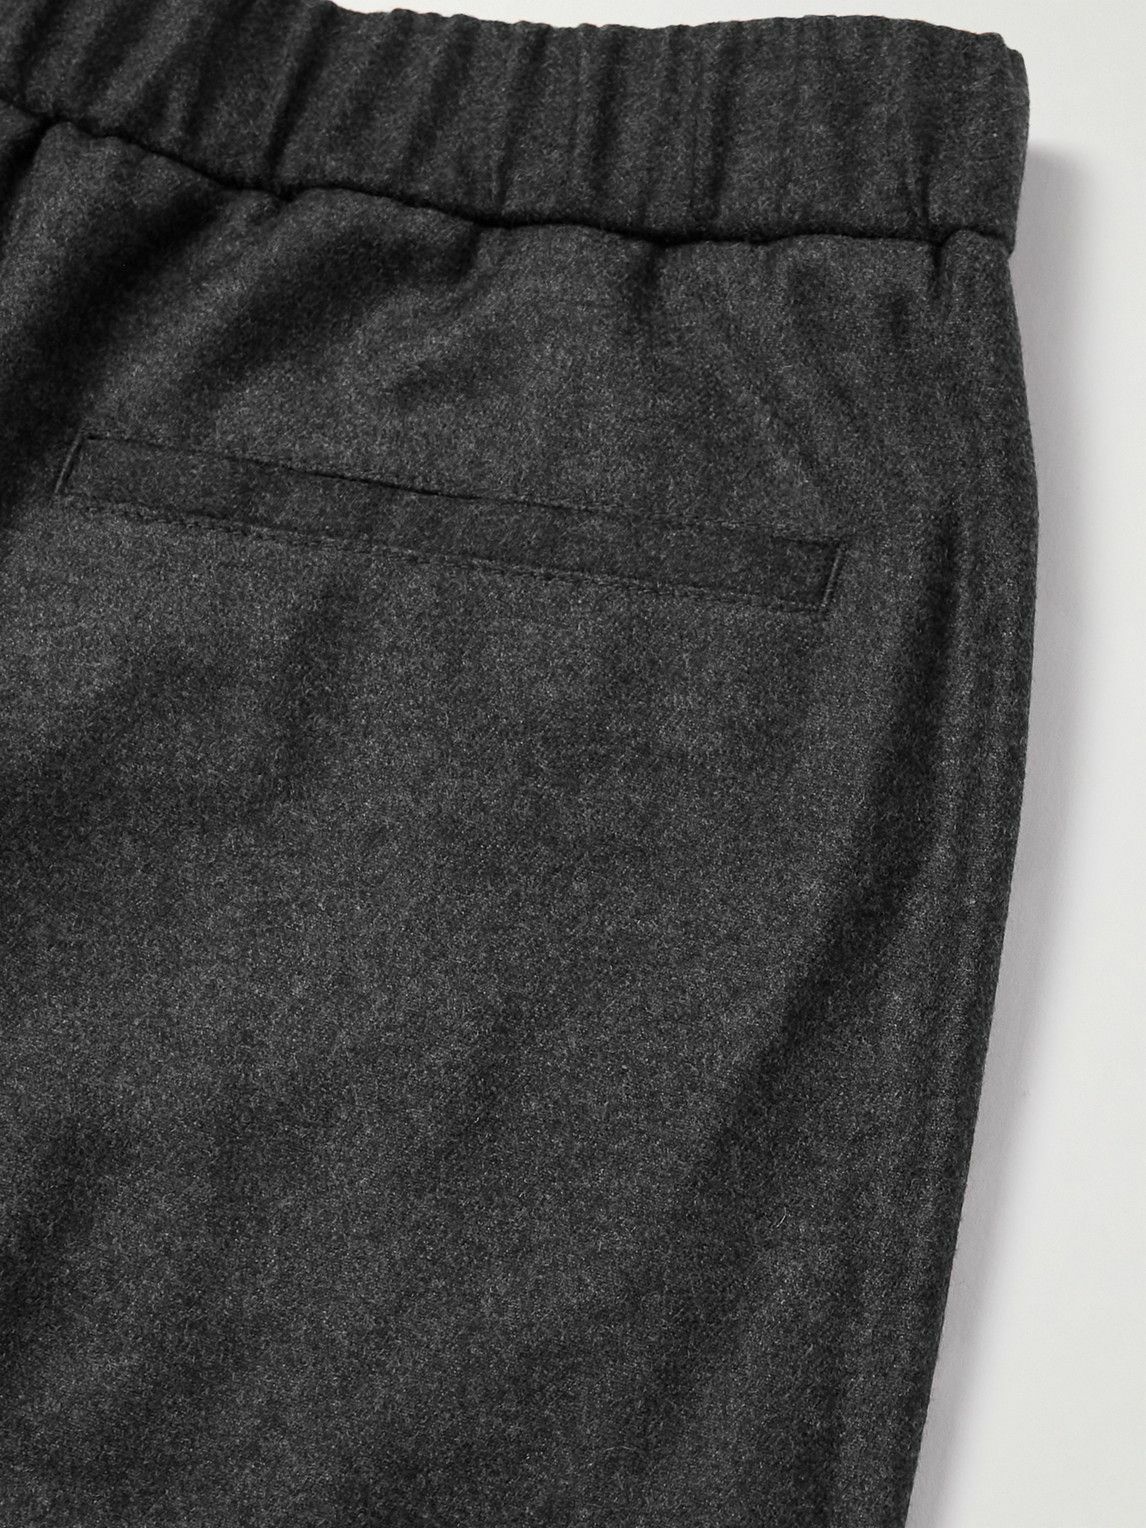 Loro Piana - Slim-Fit Virgin Wool and Cashmere-Blend Trousers - Black ...